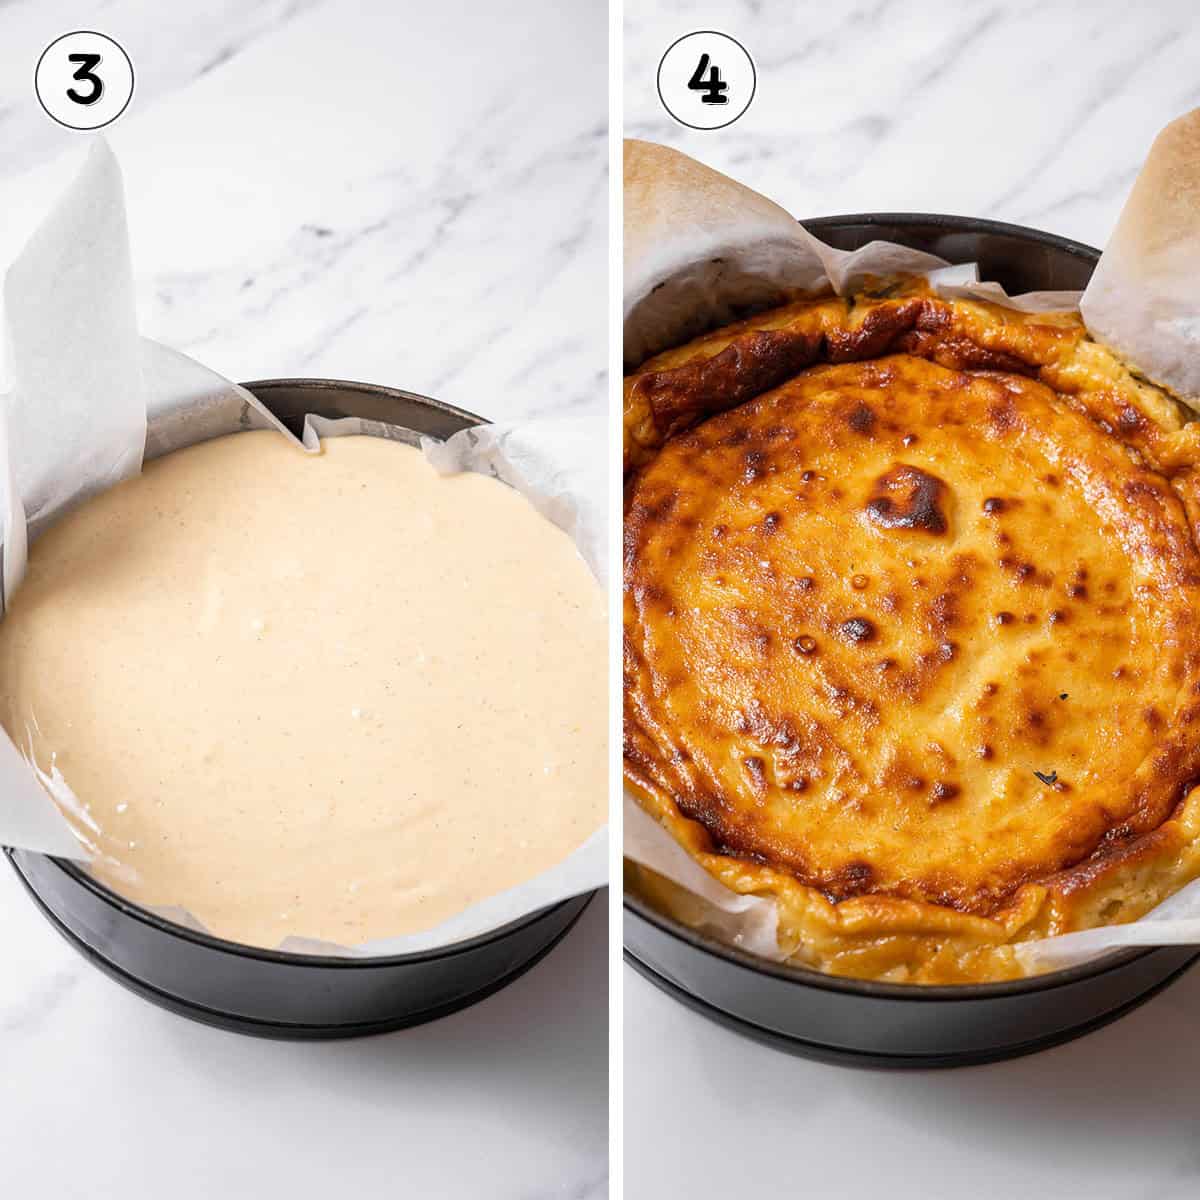 before and after baking pumpkin cheesecake.